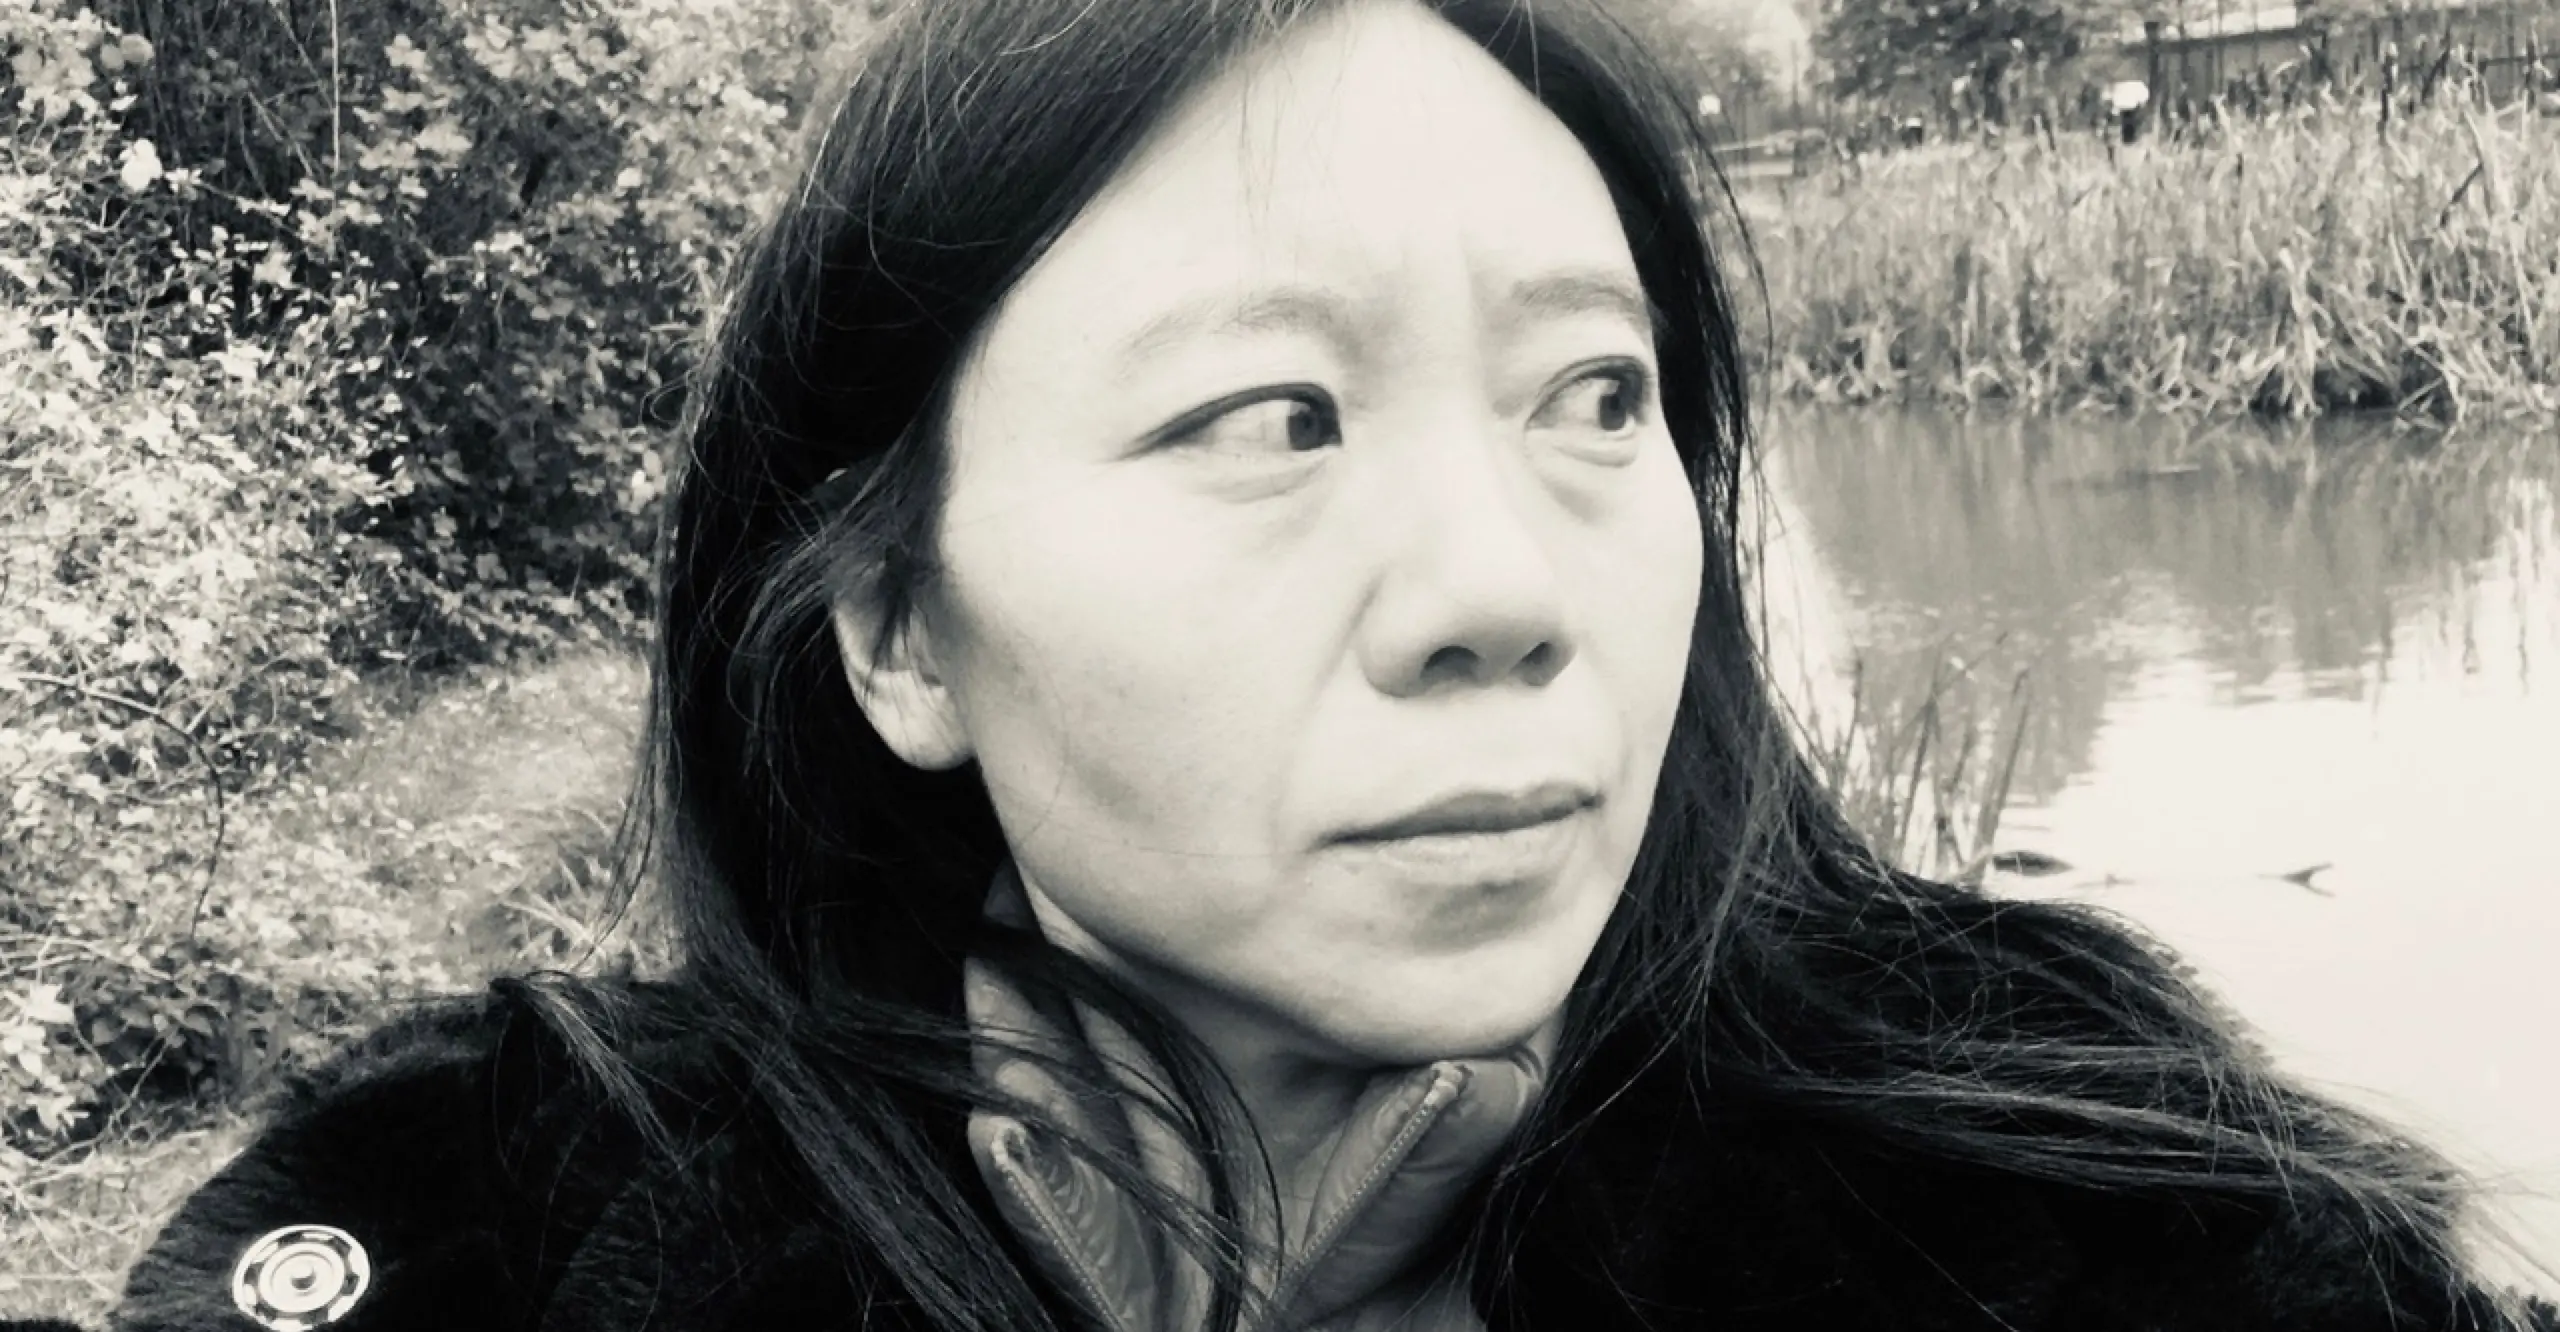 Landscape format B&W portrait of author and artist Xiaolu Guo